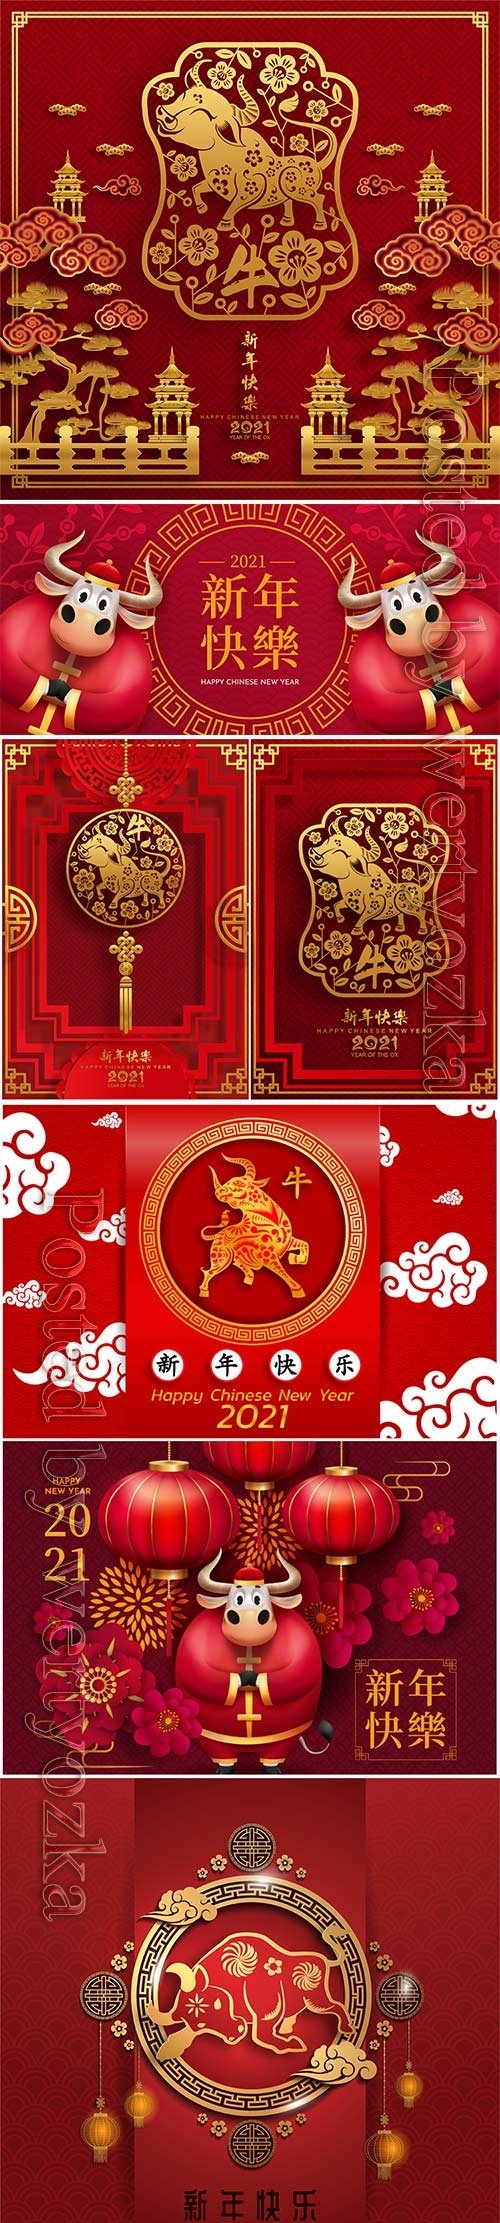 Happy chinese new year 2021 vector